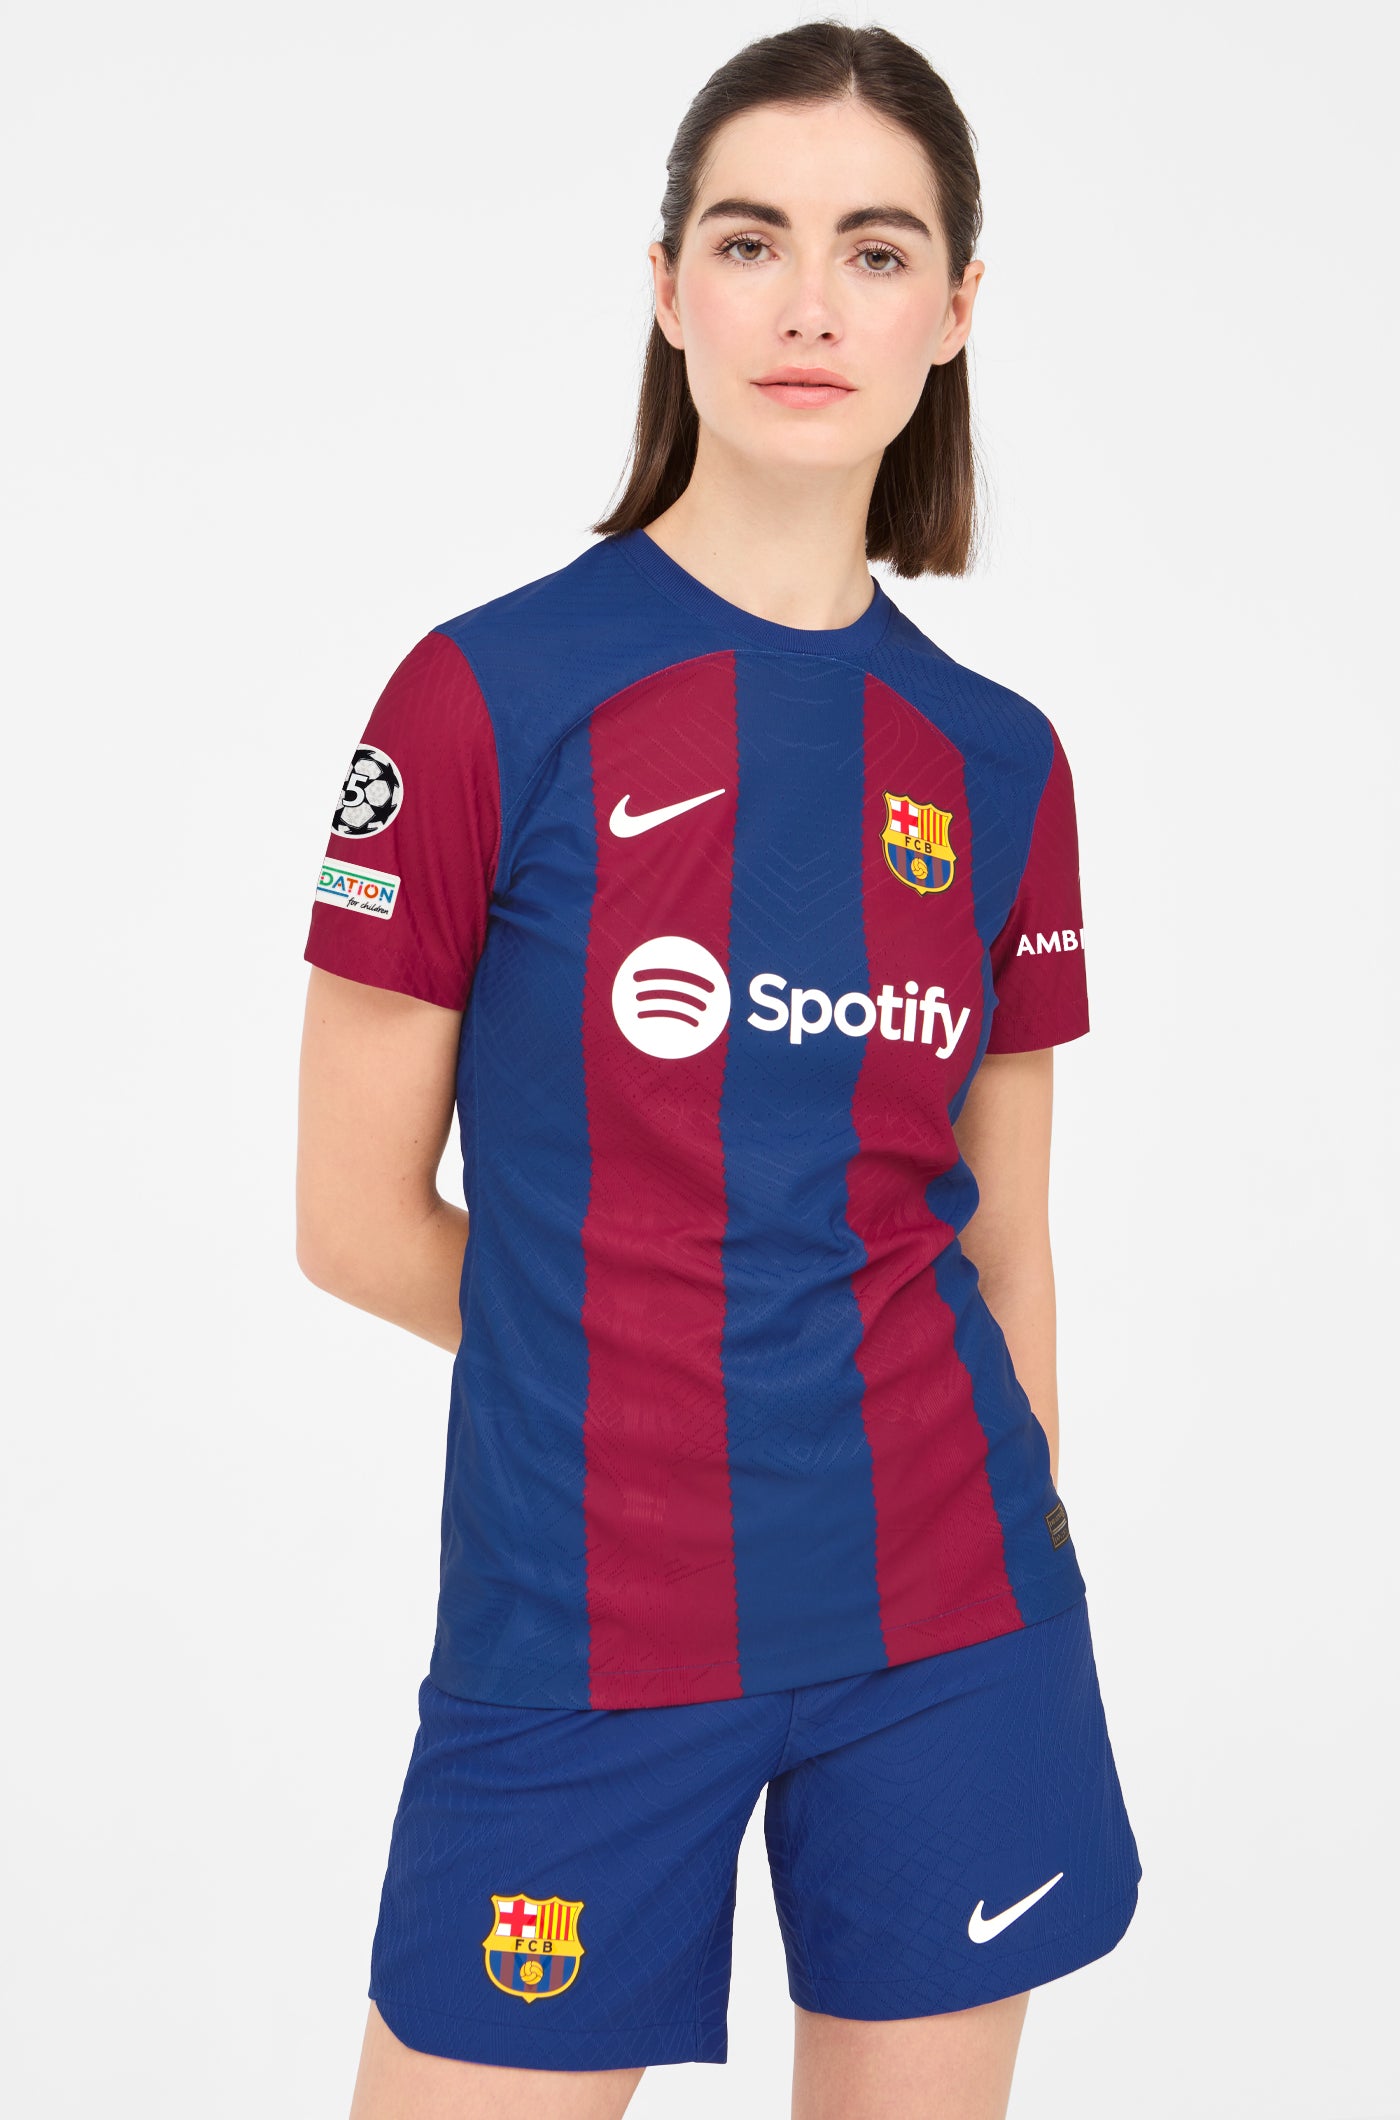 UCL FC Barcelona Home Shirt 23/24 Player's Edition - Women - VITOR ROQUE